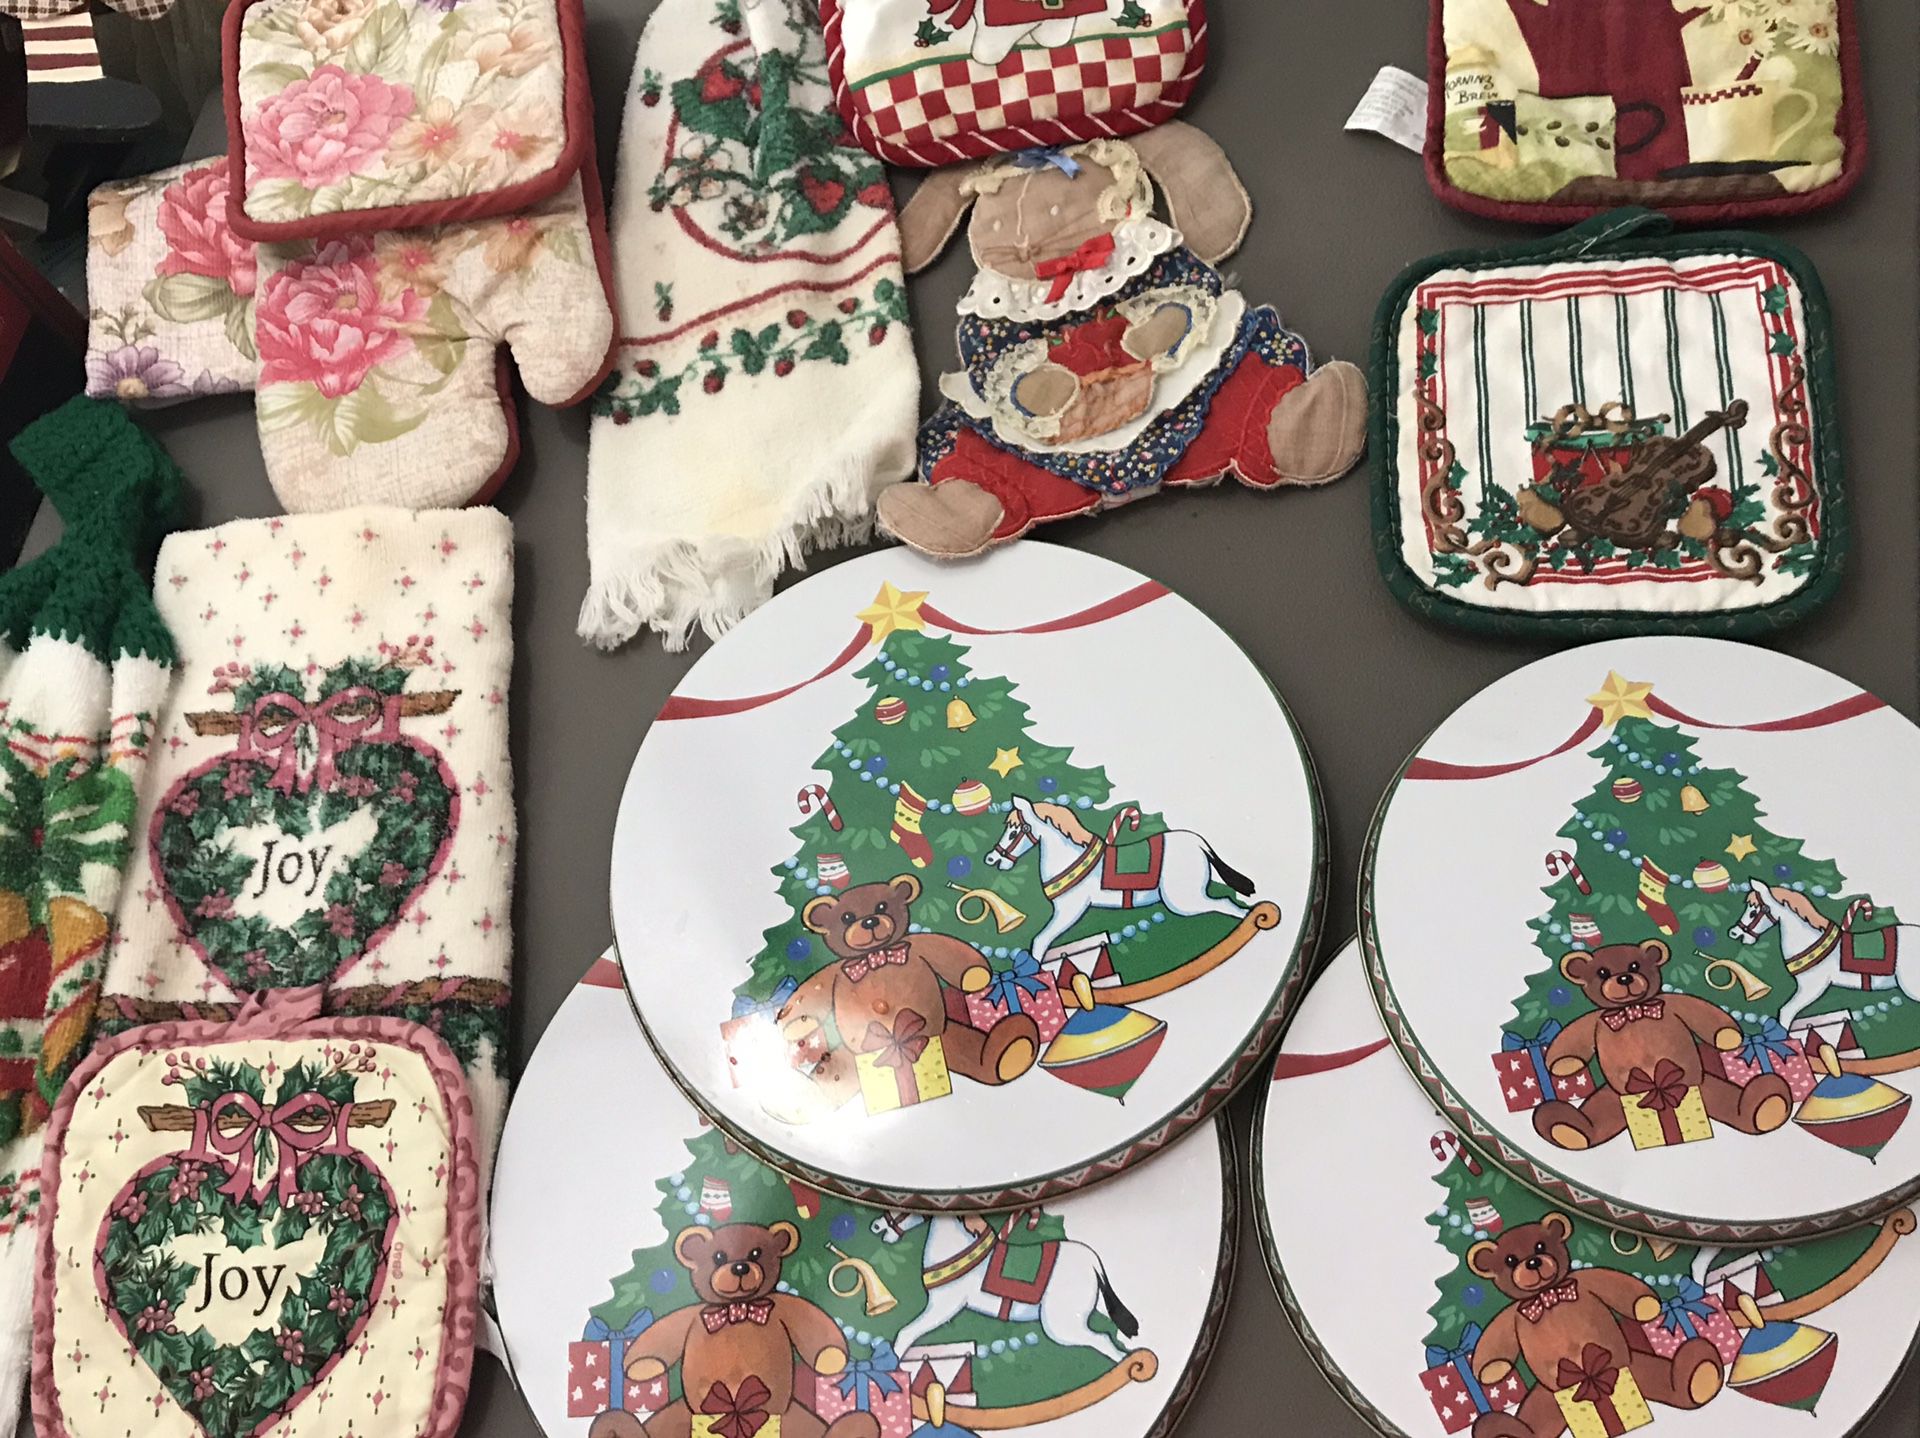 Holiday kitchen decor all for $5 or $1 a set